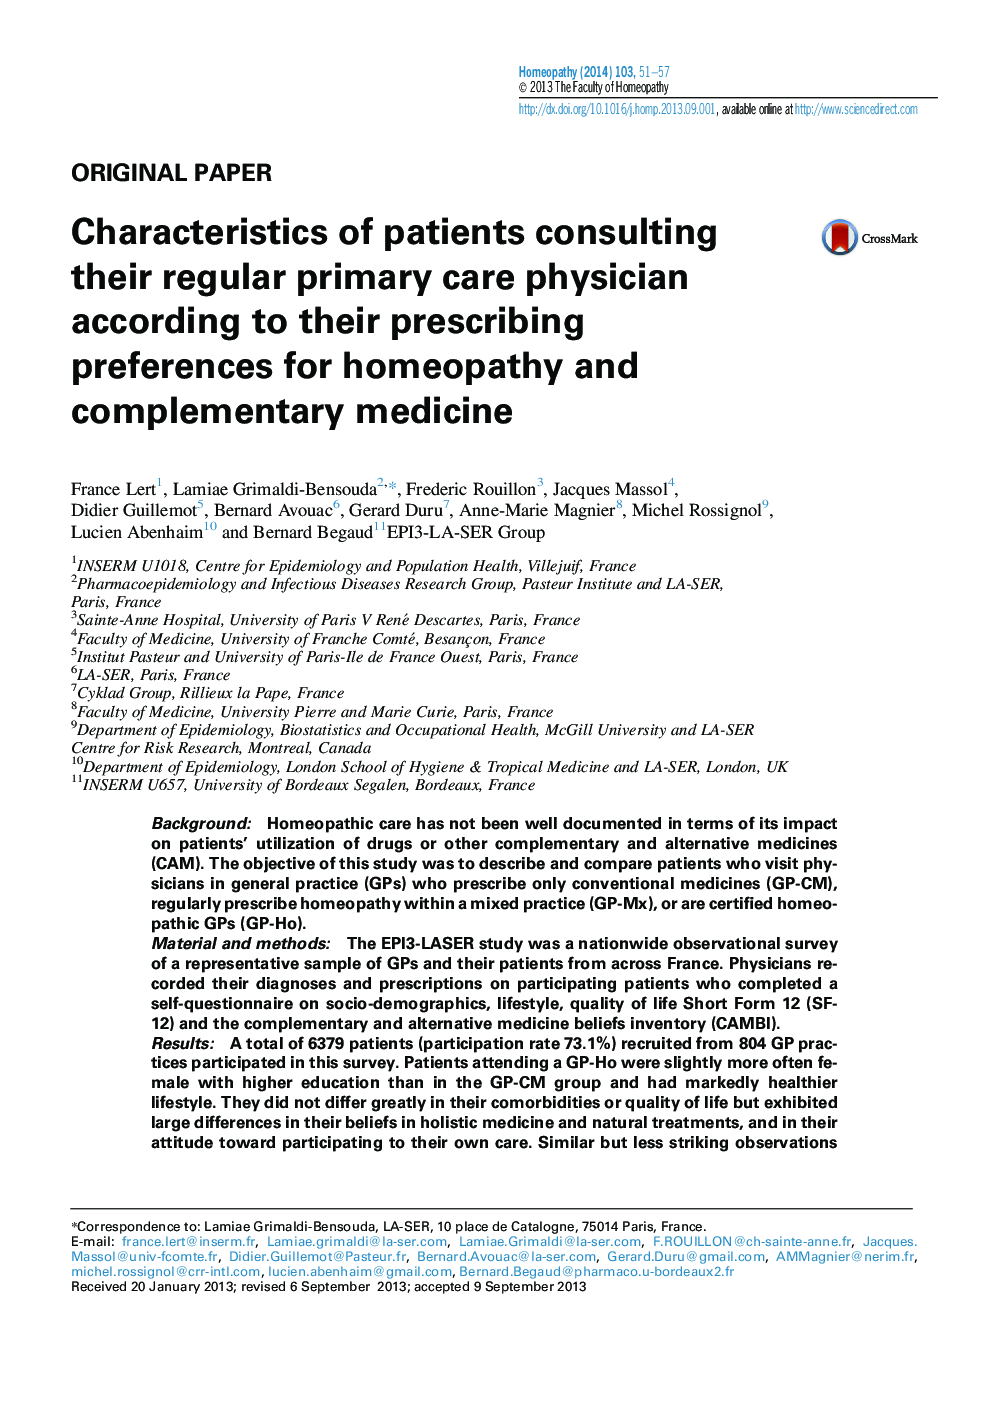 Characteristics of patients consulting their regular primary care physician according to their prescribing preferences for homeopathy and complementary medicine